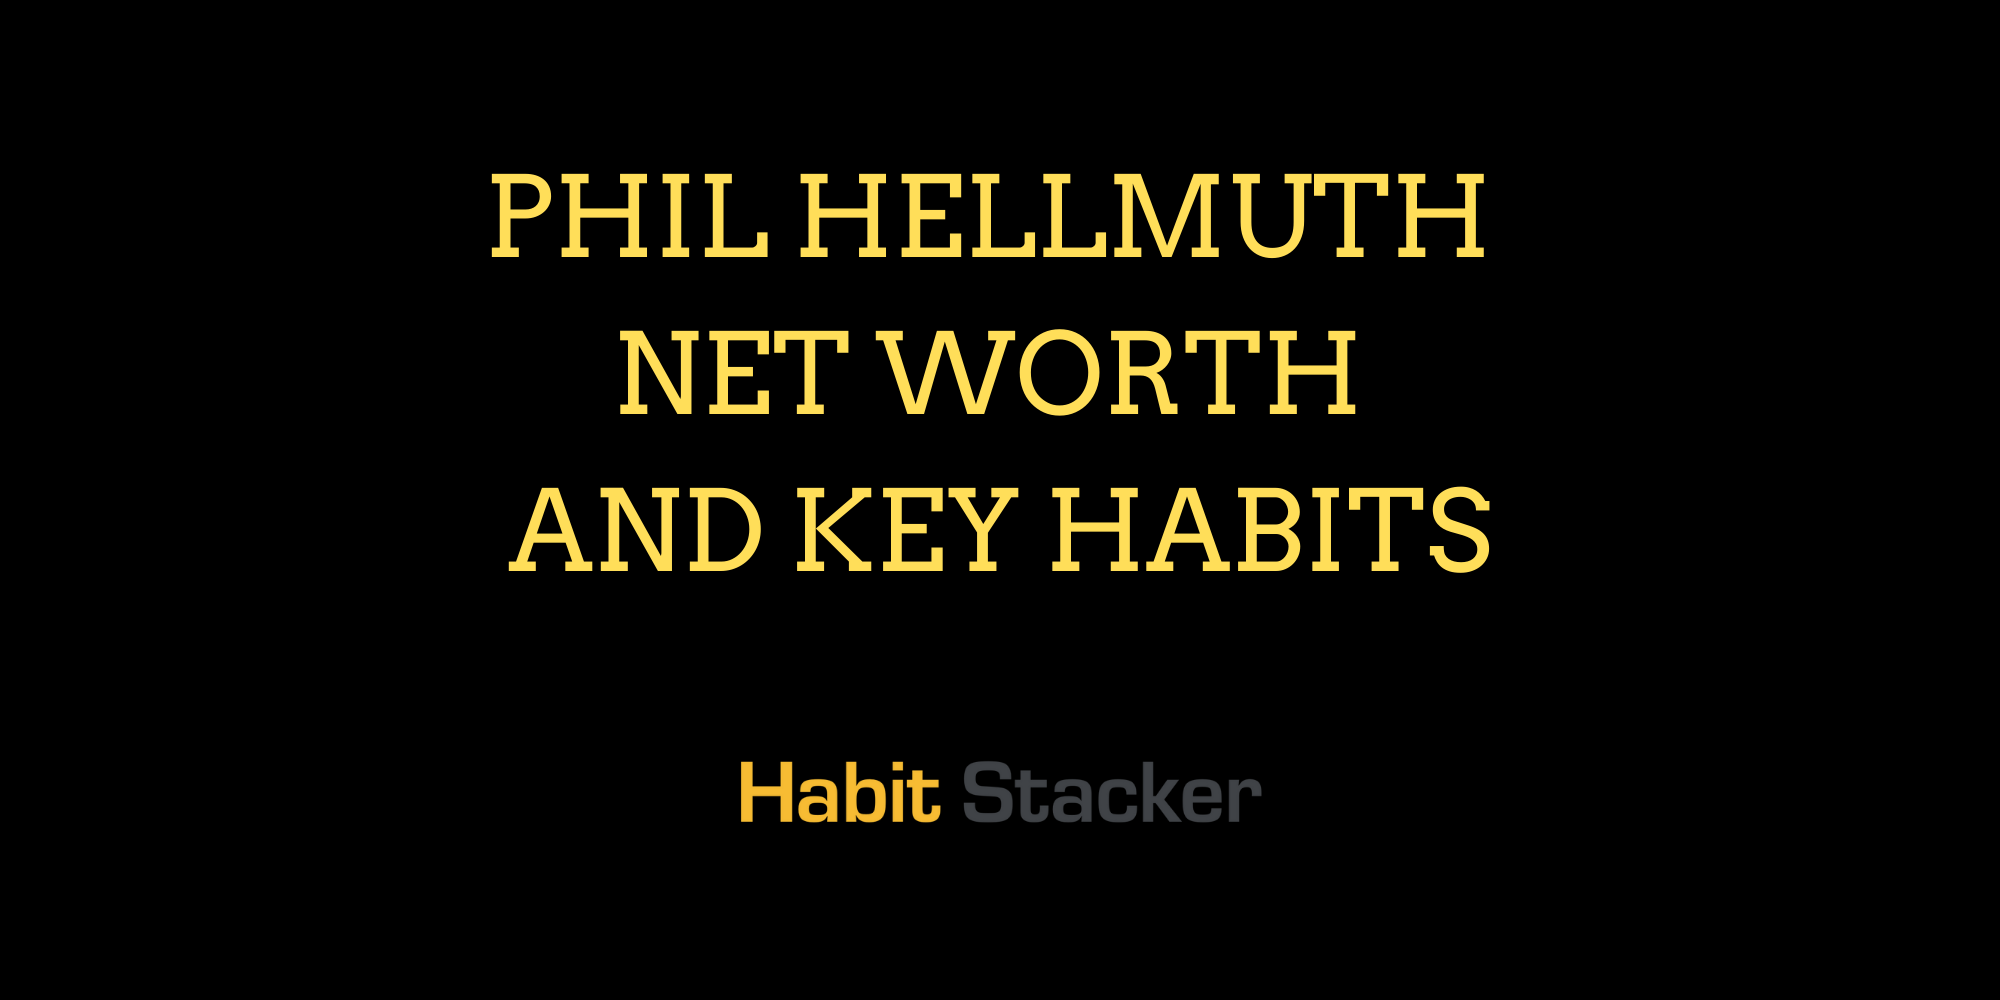 Phil Hellmuth Net Worth and Key Habits